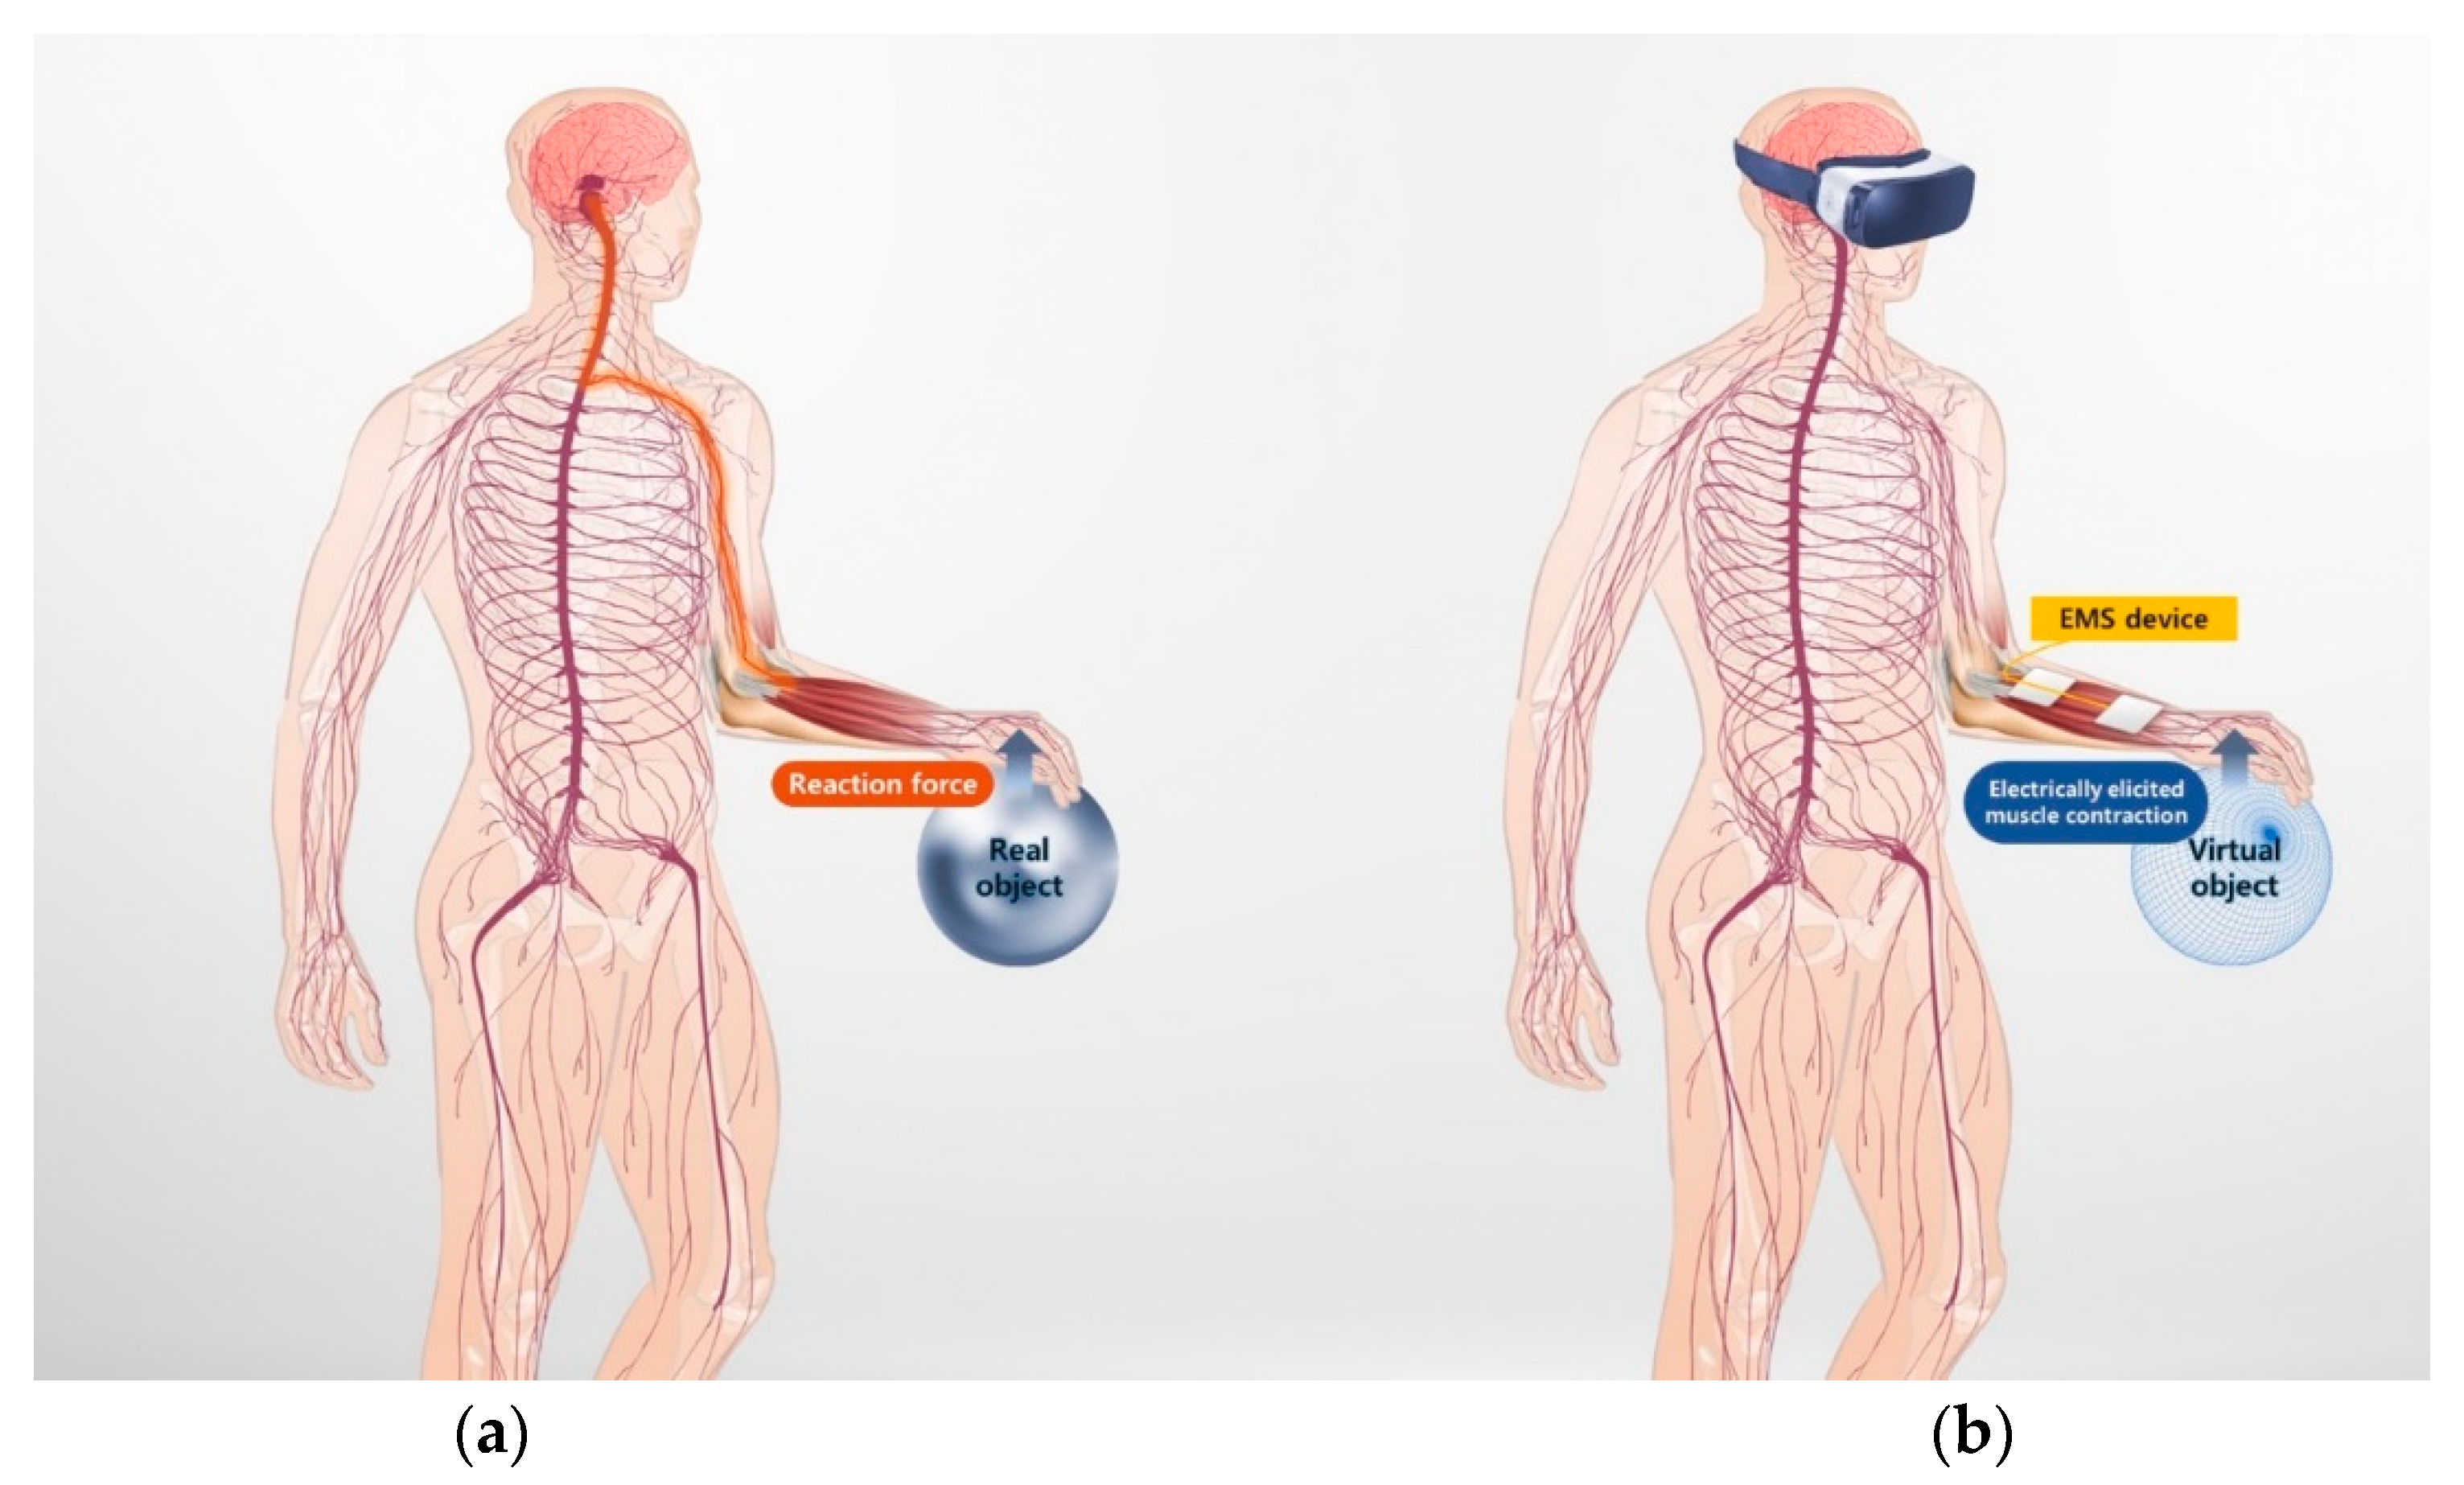 Muscular Stimulation – The World of Implantable Devices